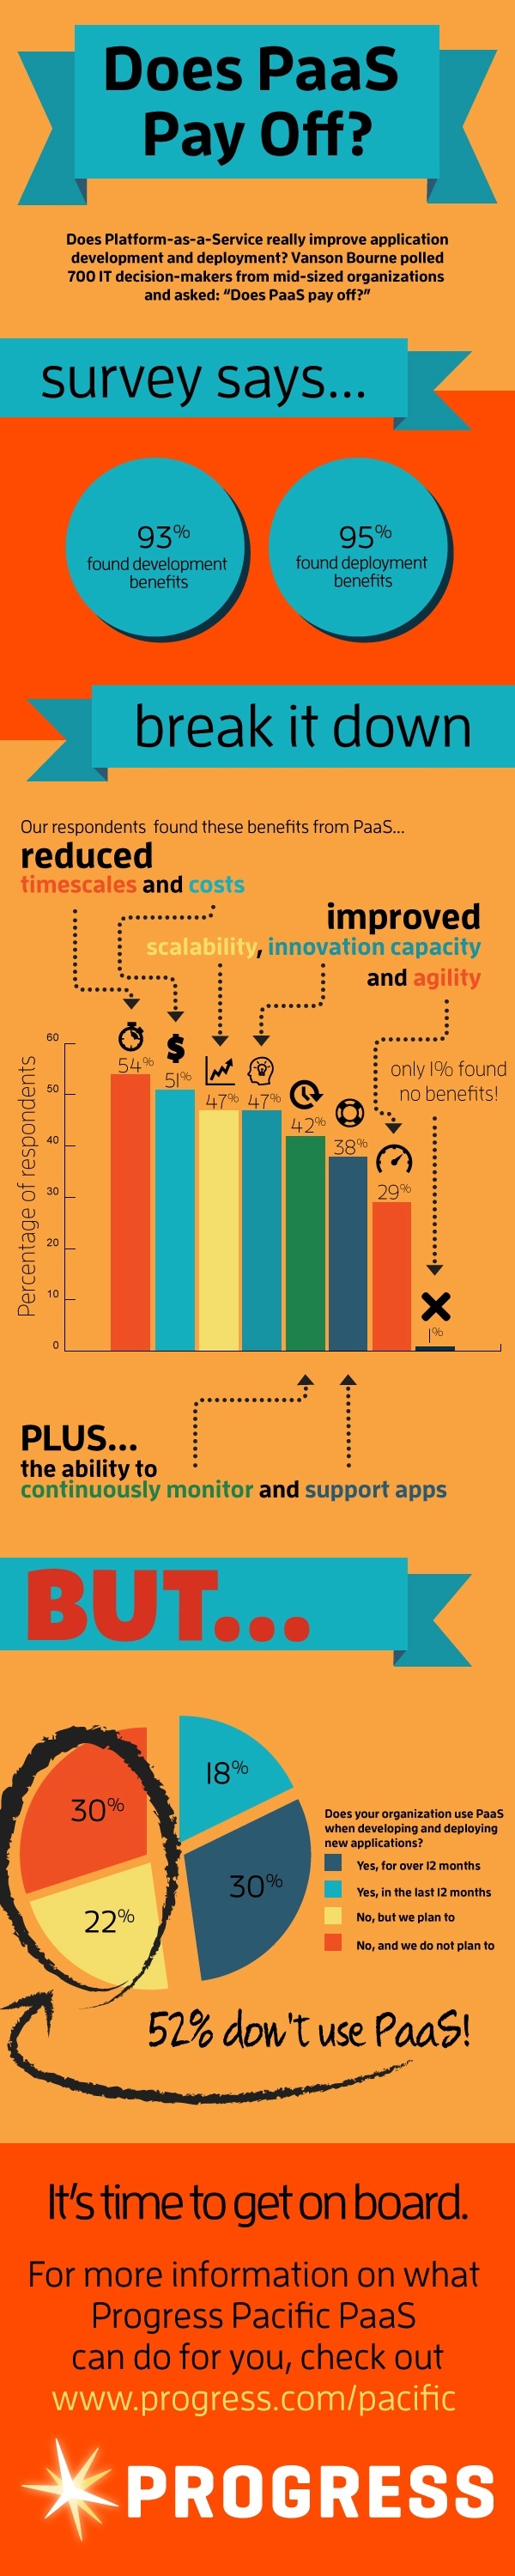 PaaS Pays Off Infographic